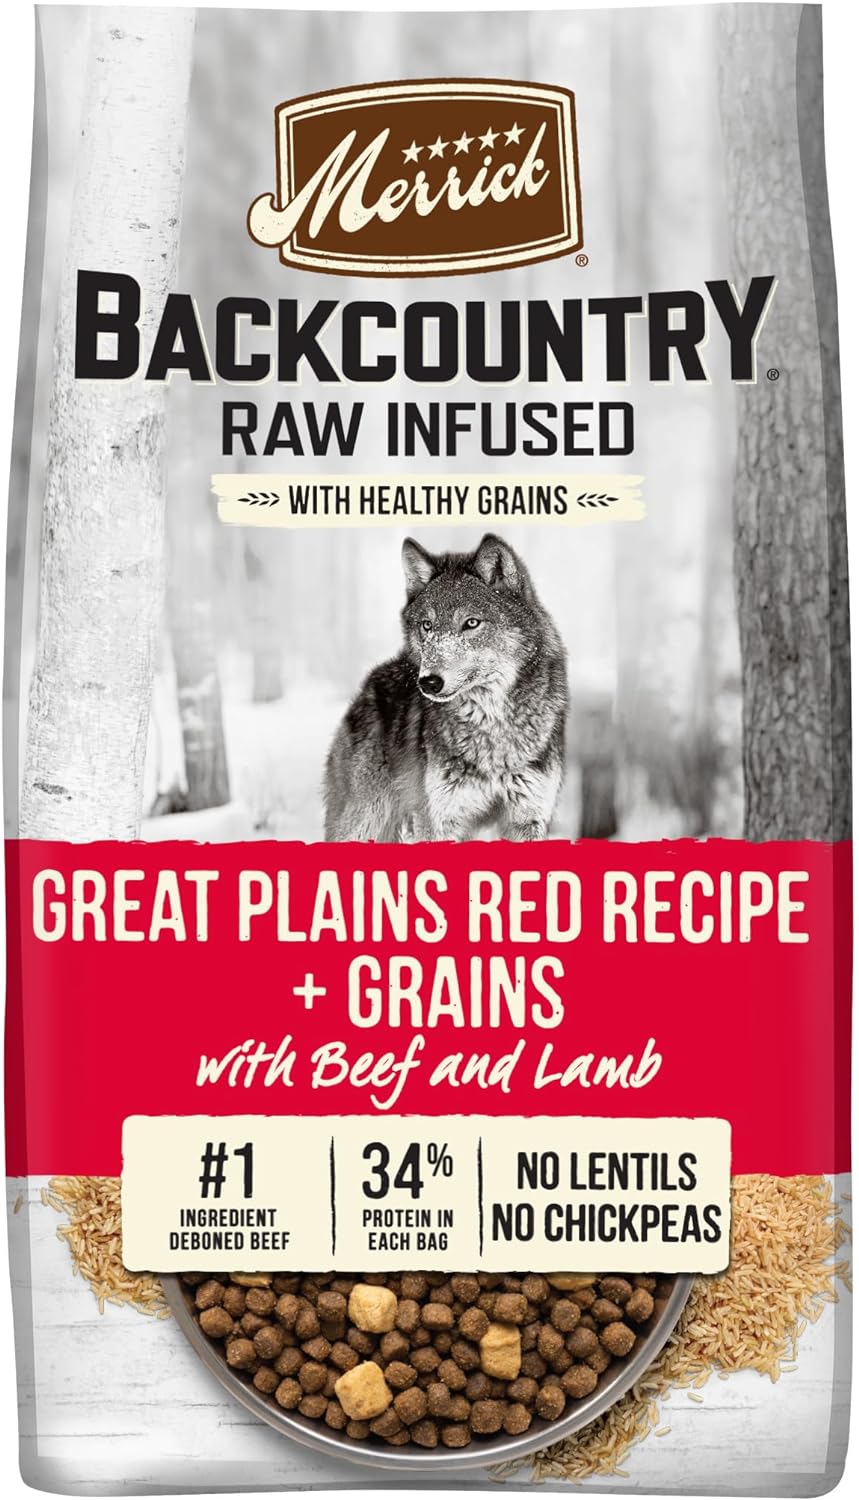 Merrick Backcountry Raw Infused Great Plains Red Recipe + Grains Dry Dog Food – Gallery Image 1